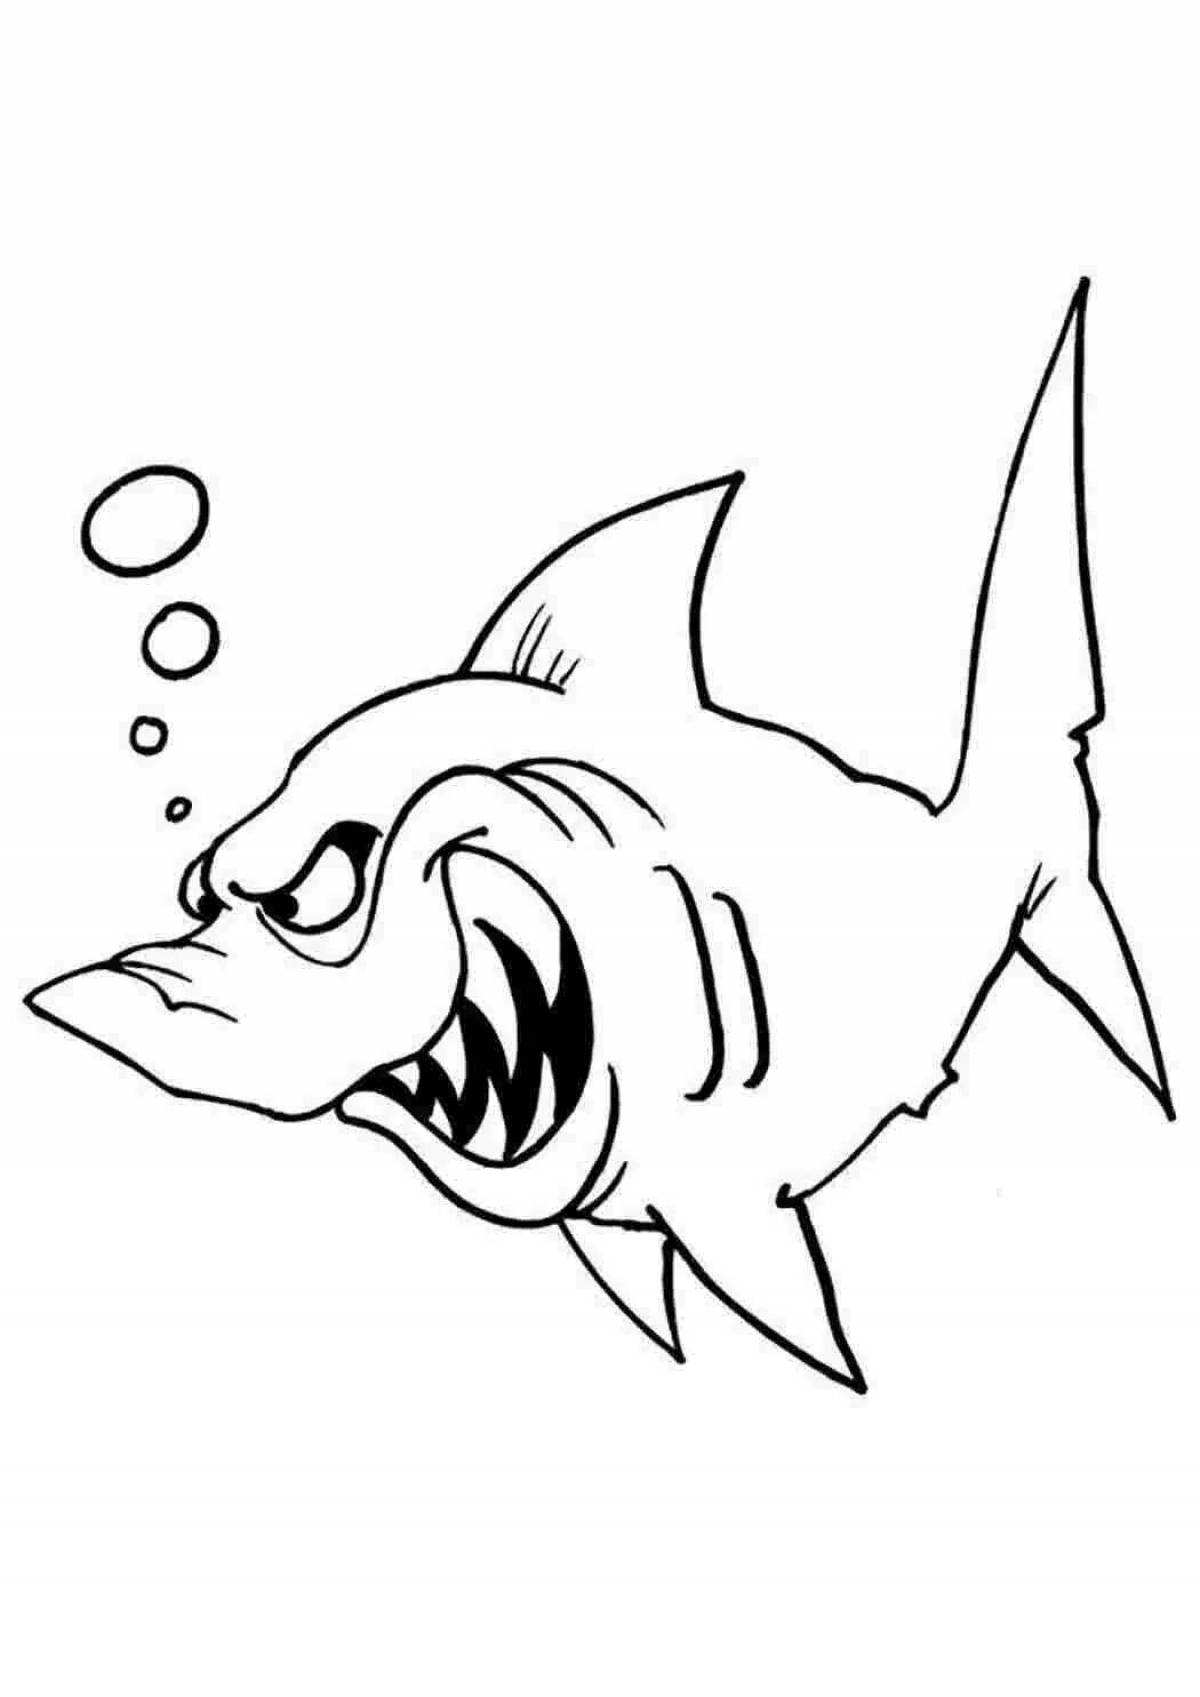 Adorable shark coloring book for kids